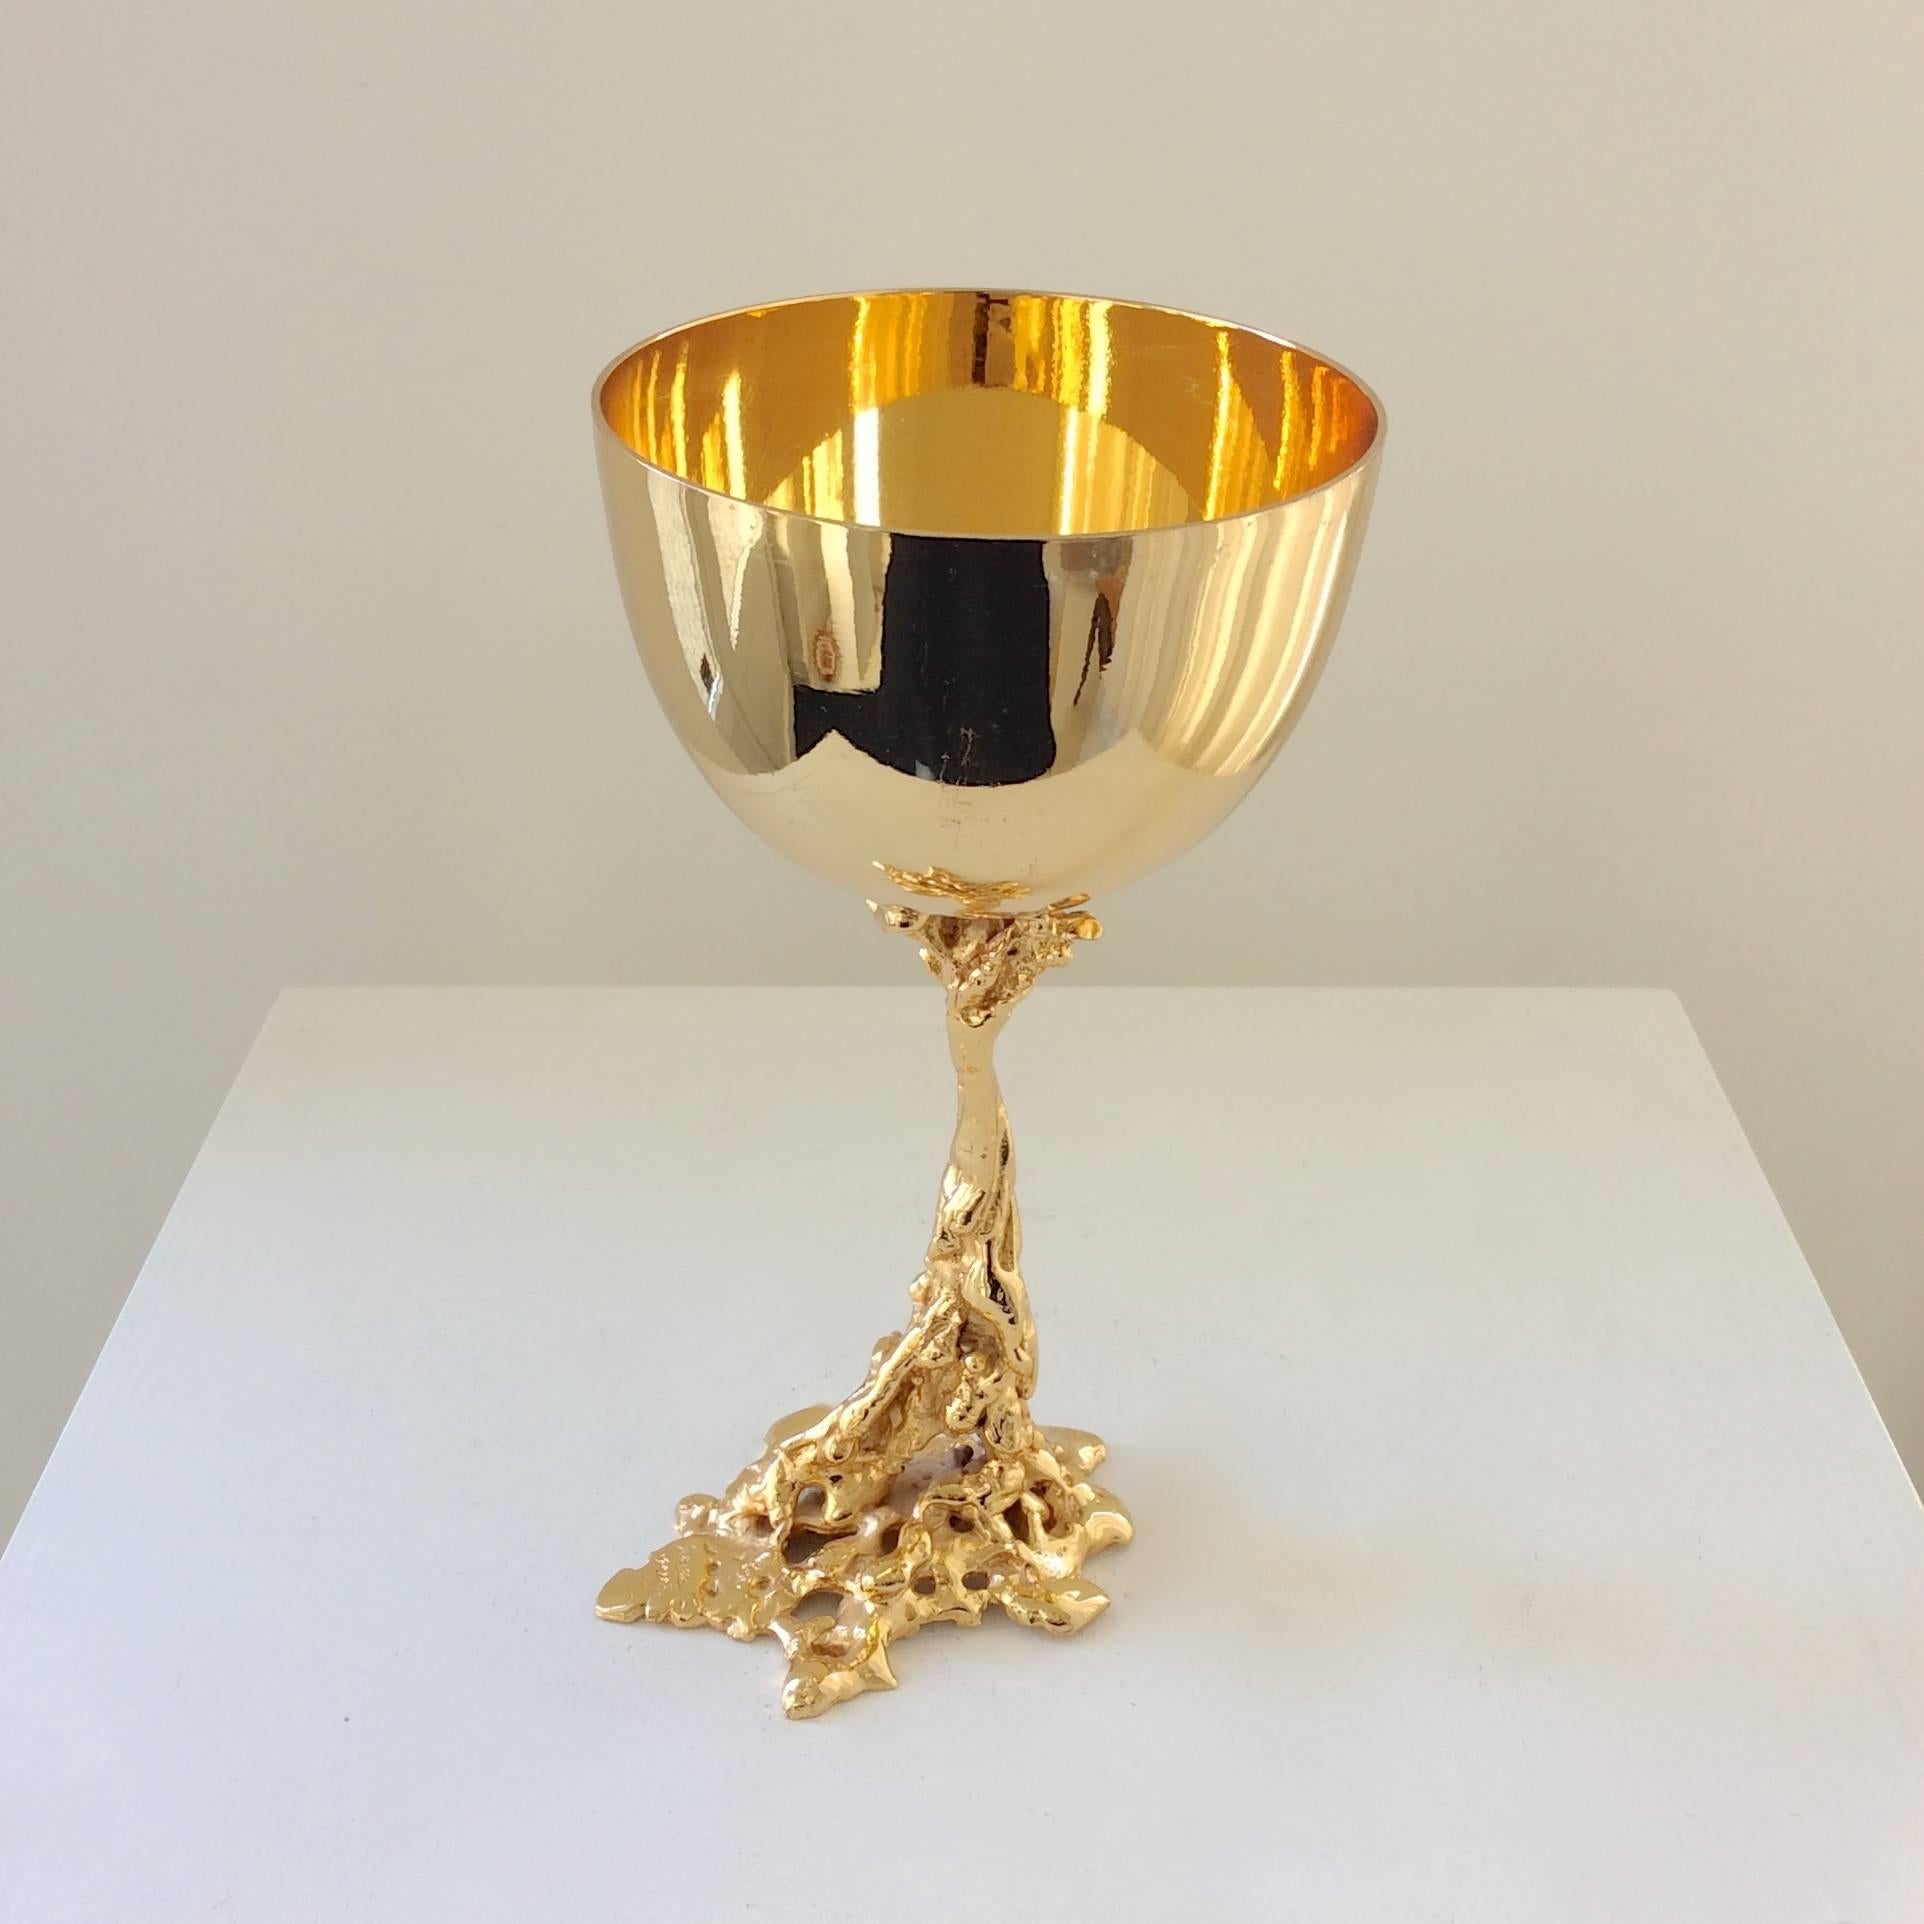 Rare Gabriella Crespi 24-carat gold-plated bronze chalice, circa 1974, Italy.
Lost-wax casting. Signed on the base.
Measure: 19 cm height, diameter 9 cm.
Good original condition. Collector item.
Illustrated model in the book: Gabriella Crespi,